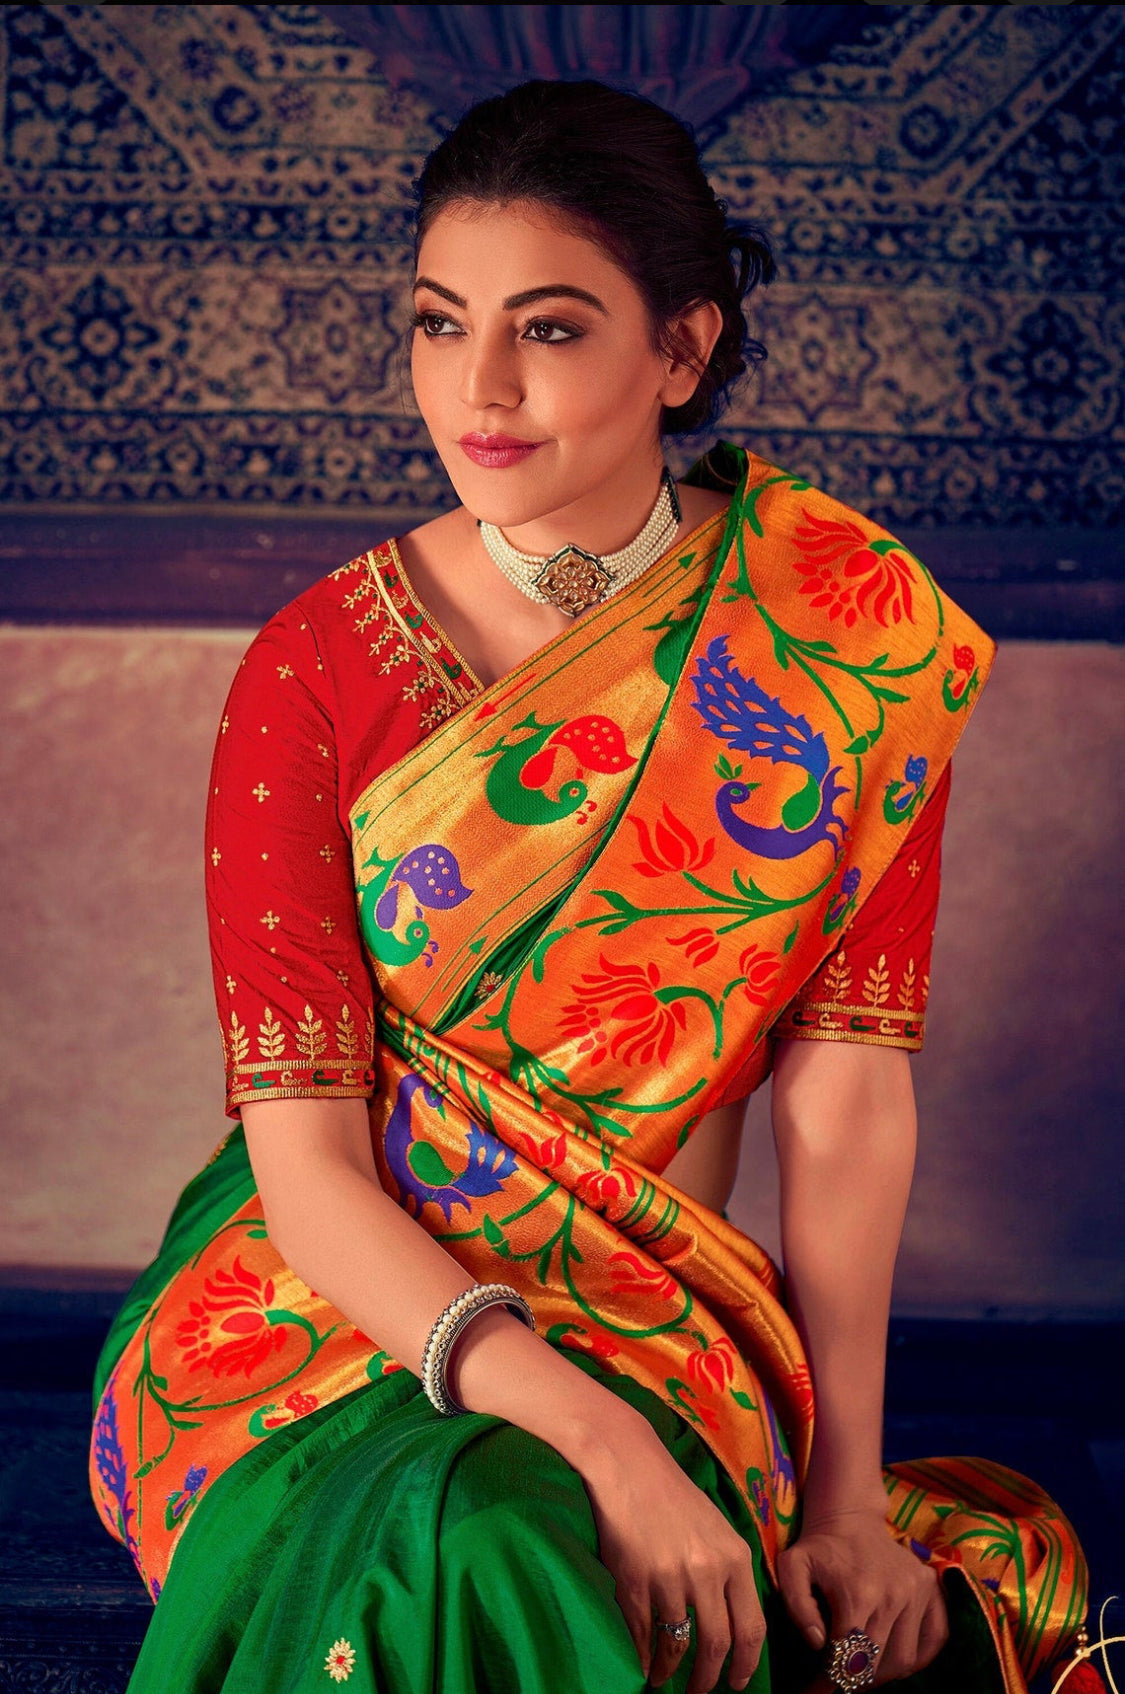 Green and Red Designer Paithani Silk Saree with Desiger Embroidered Blouse